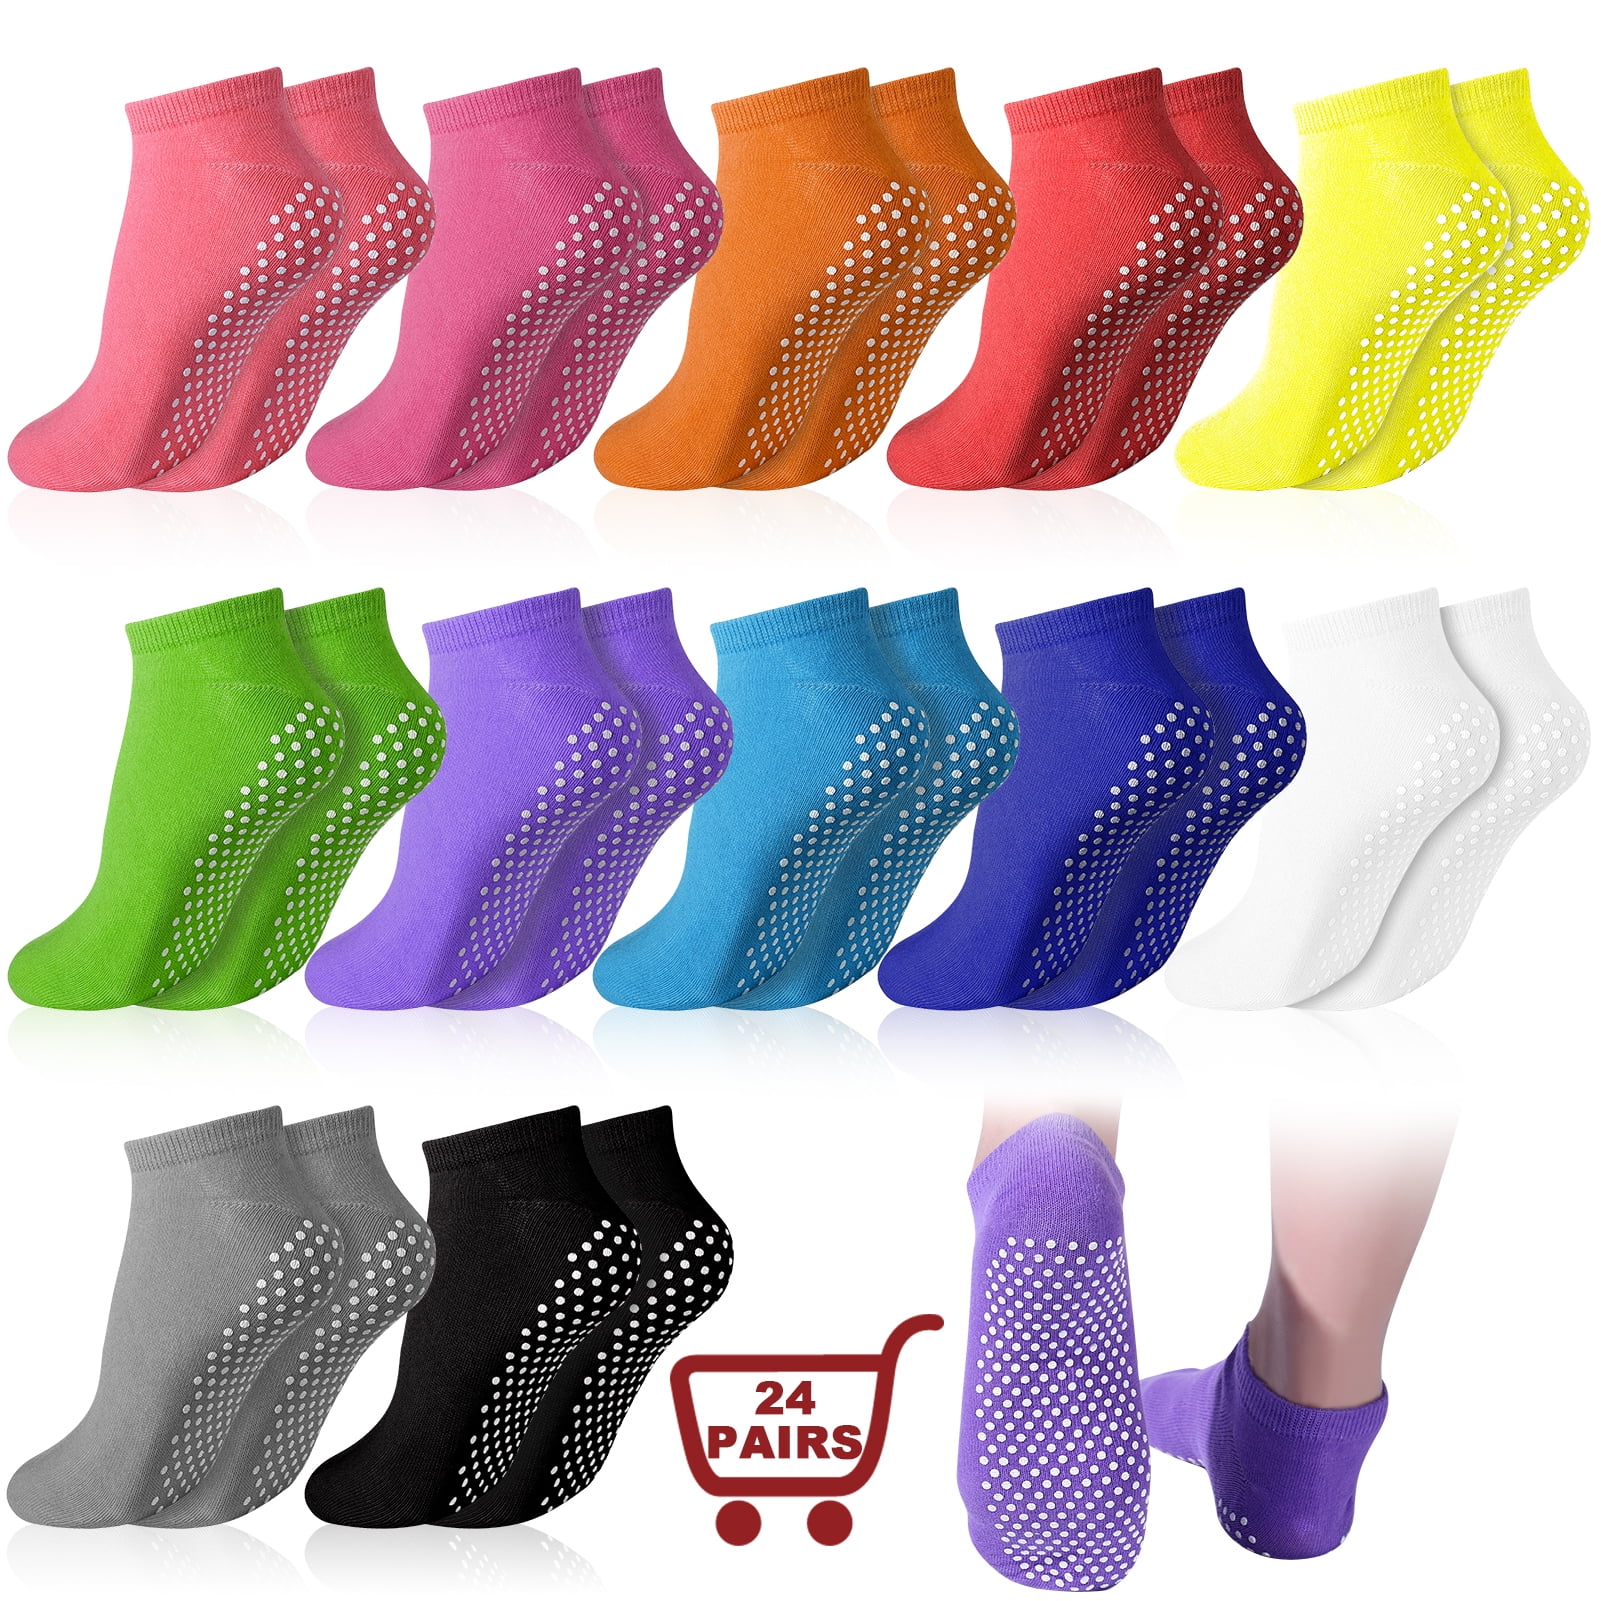 COSTYLE 3 Pairs Pilates Socks with Grips for Women Yoga Socks